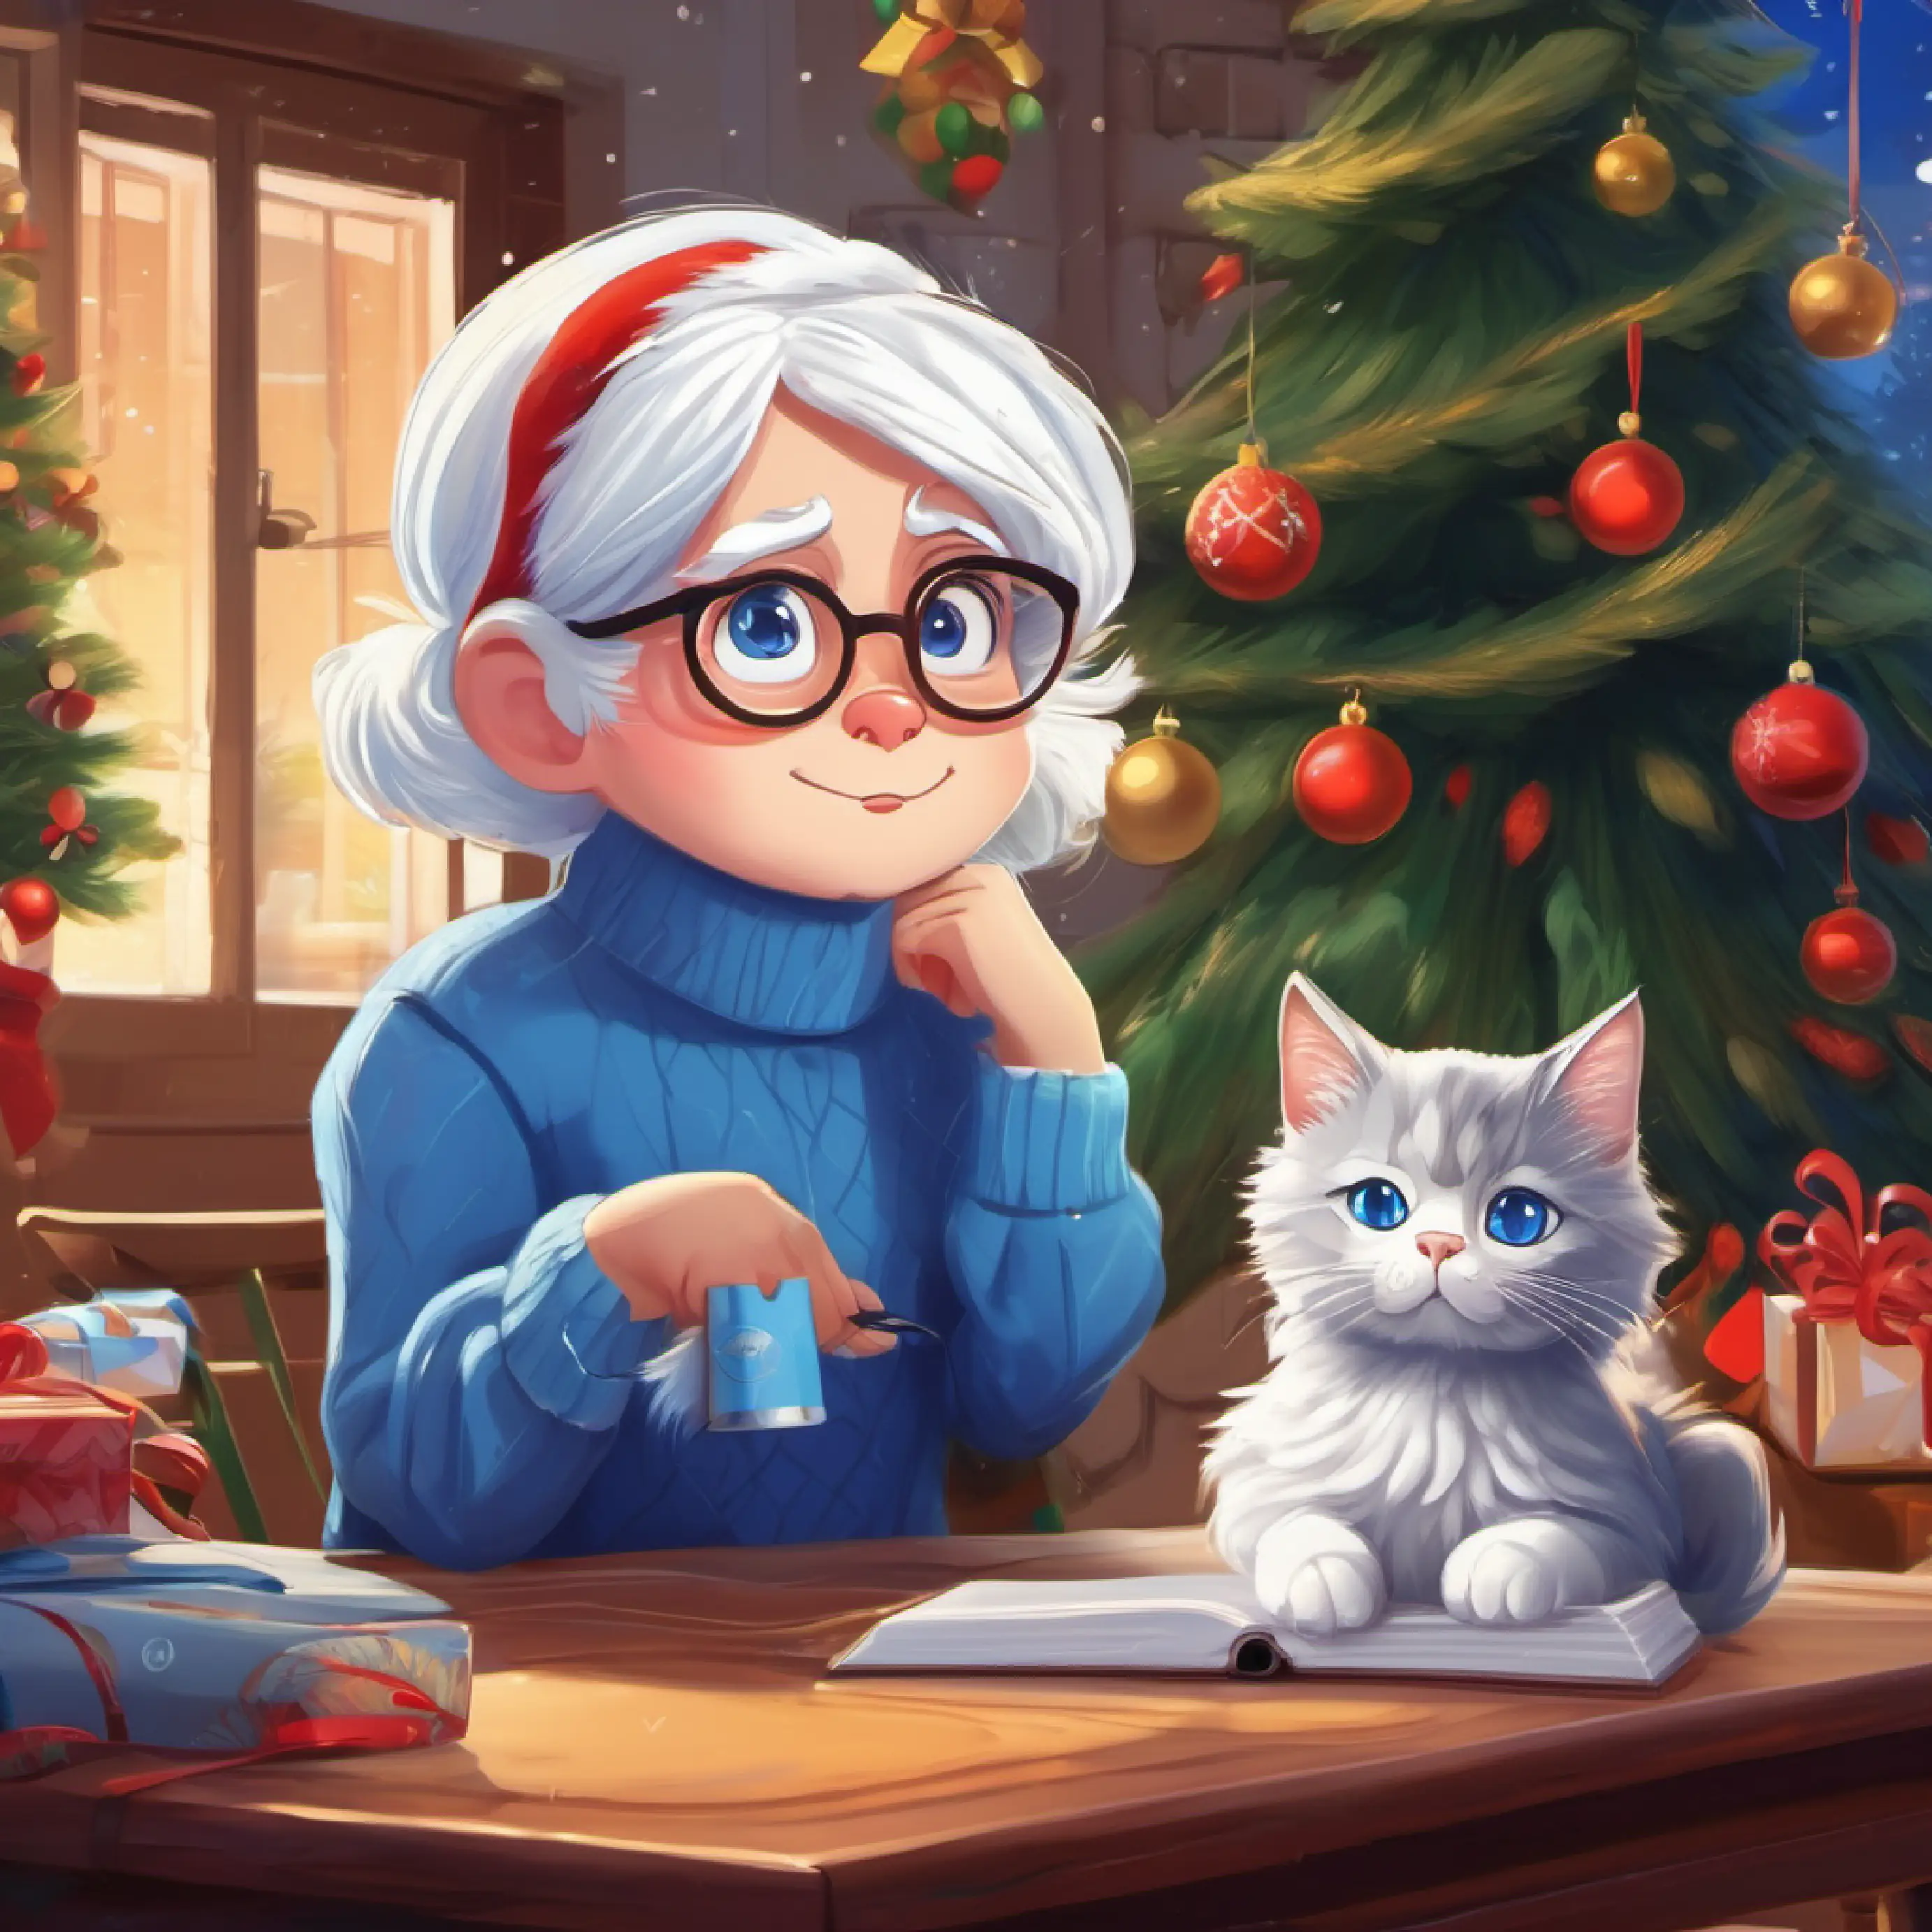 Morning confusion, curious Tired-looking, glasses, white hair, blue eyes, clueless cat